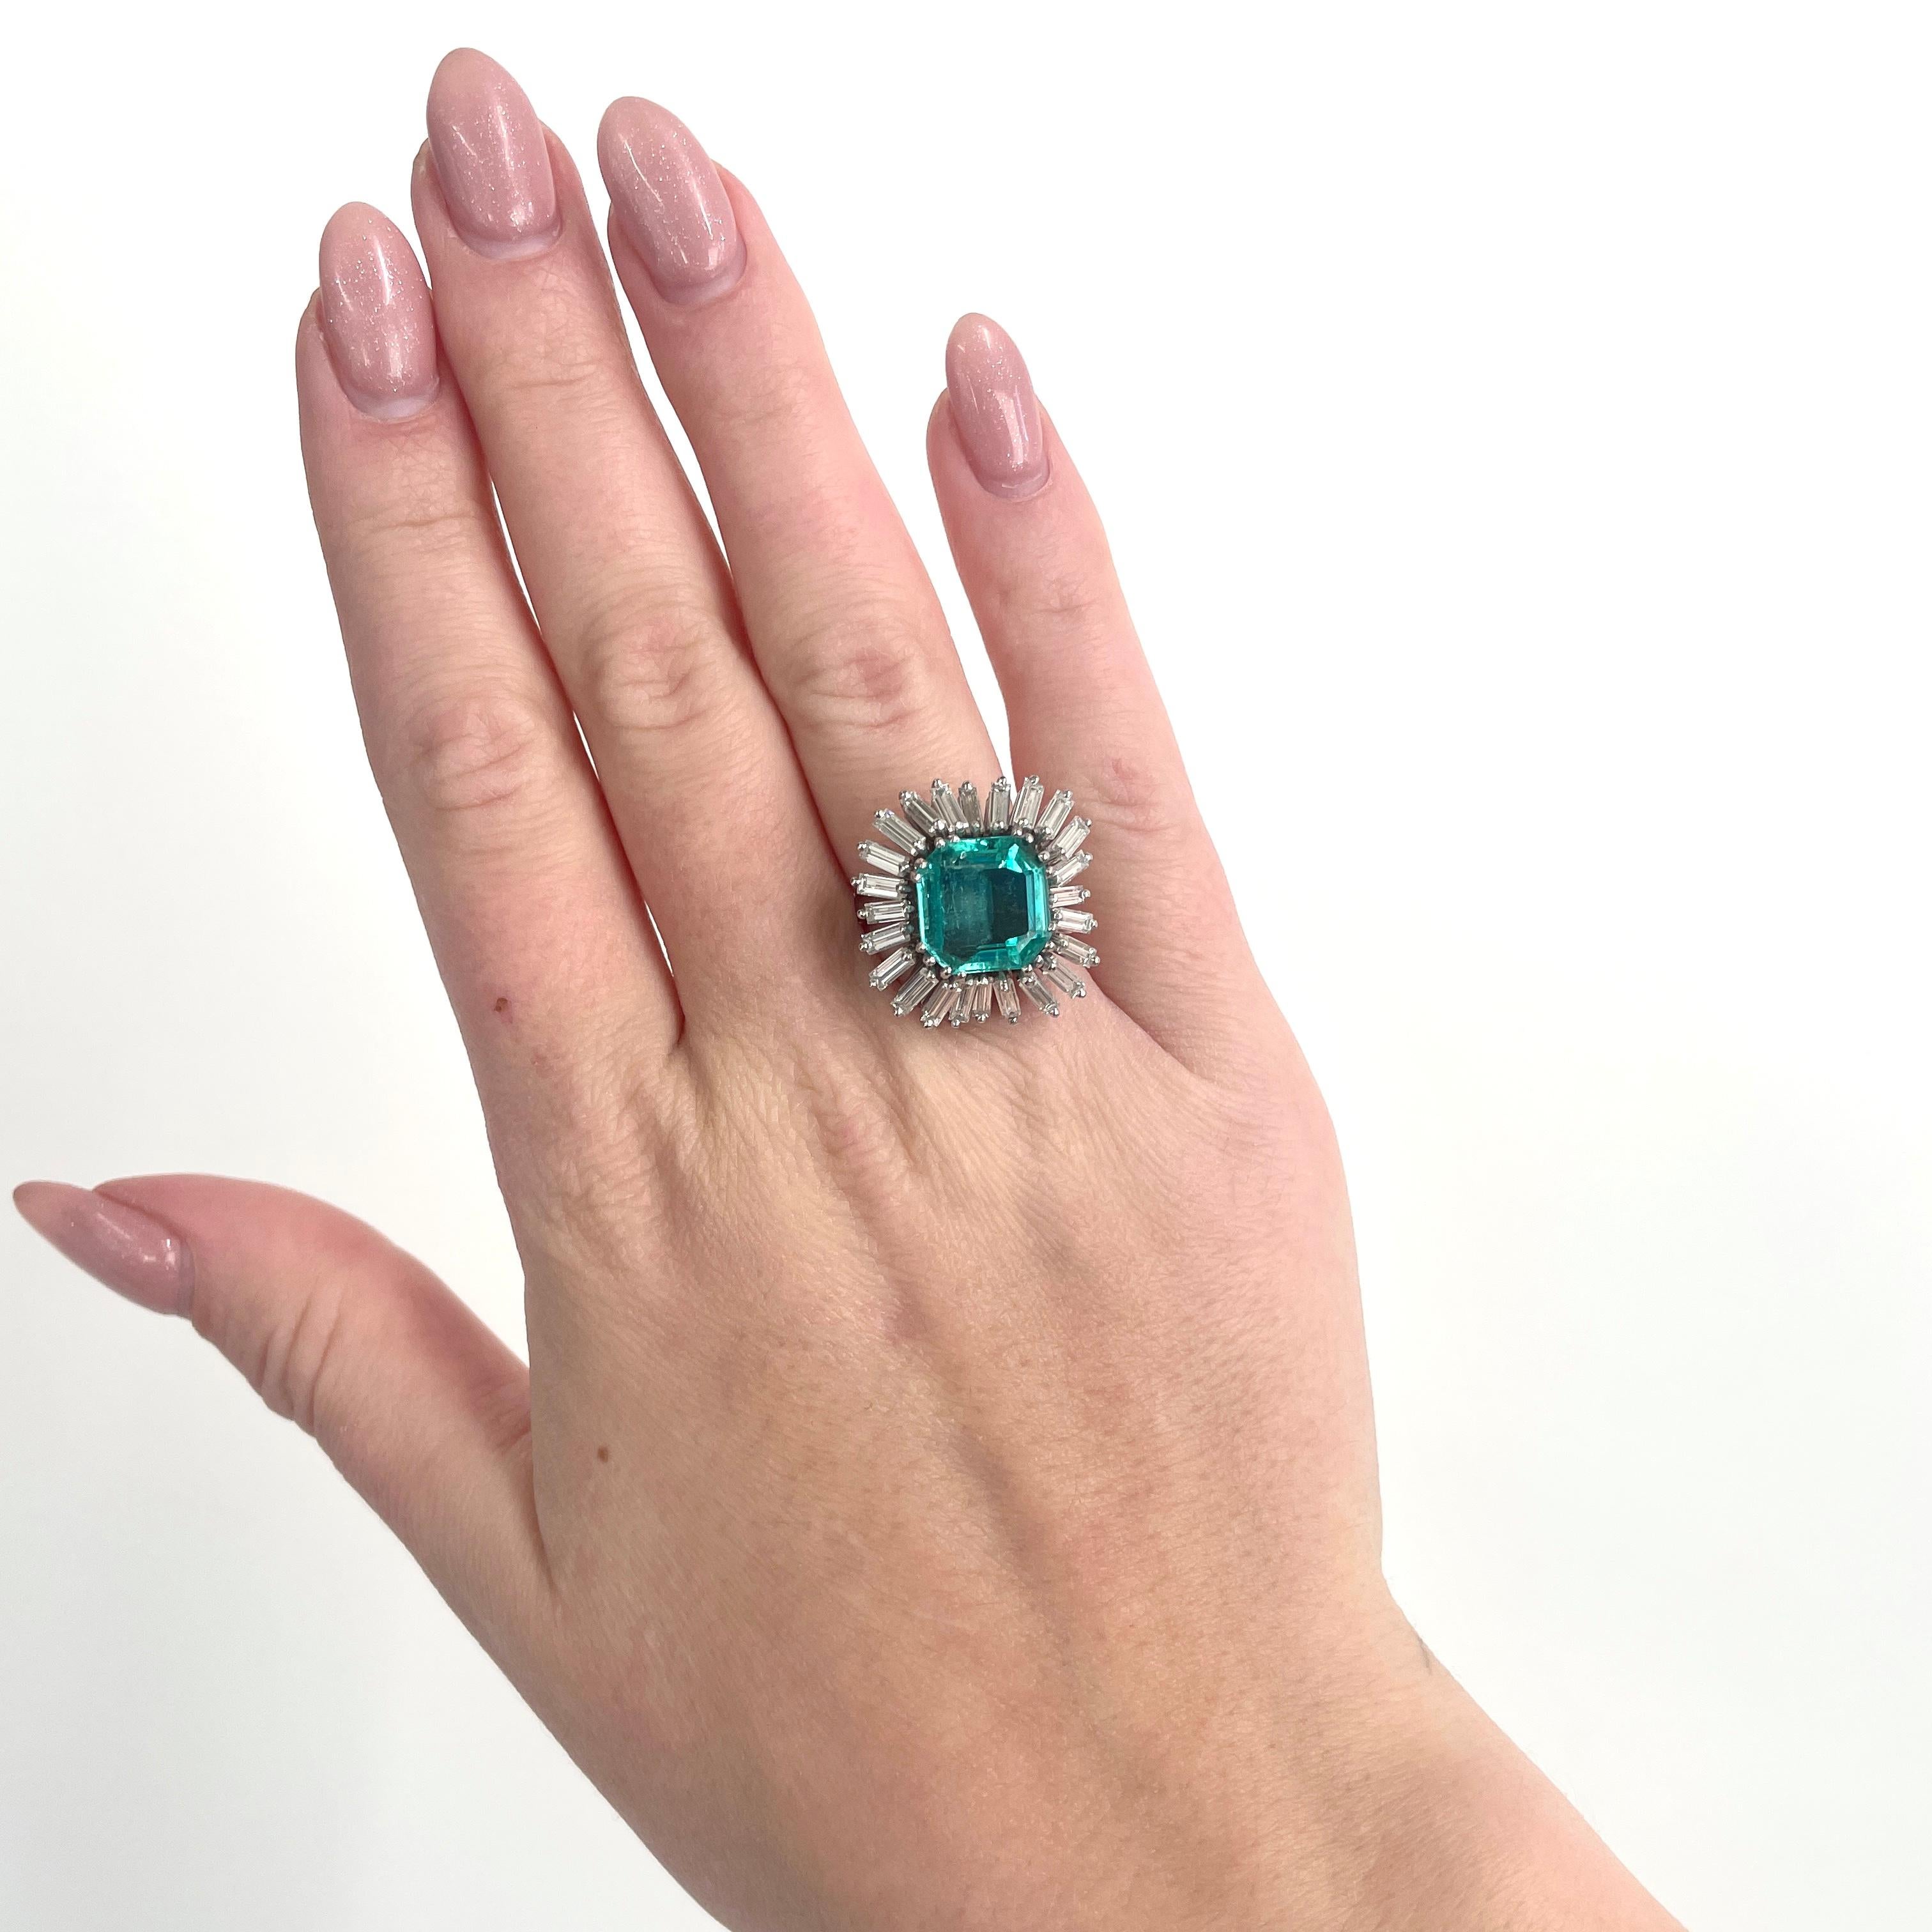 Make a statement as you walk into the room. This striking vintage emerald and diamond ring will not let you go unnoticed at any soiree. Radiate your sparkle and confidence. This is a Vintage GIA certified Columbian Emerald Diamond Platinum Ballerina